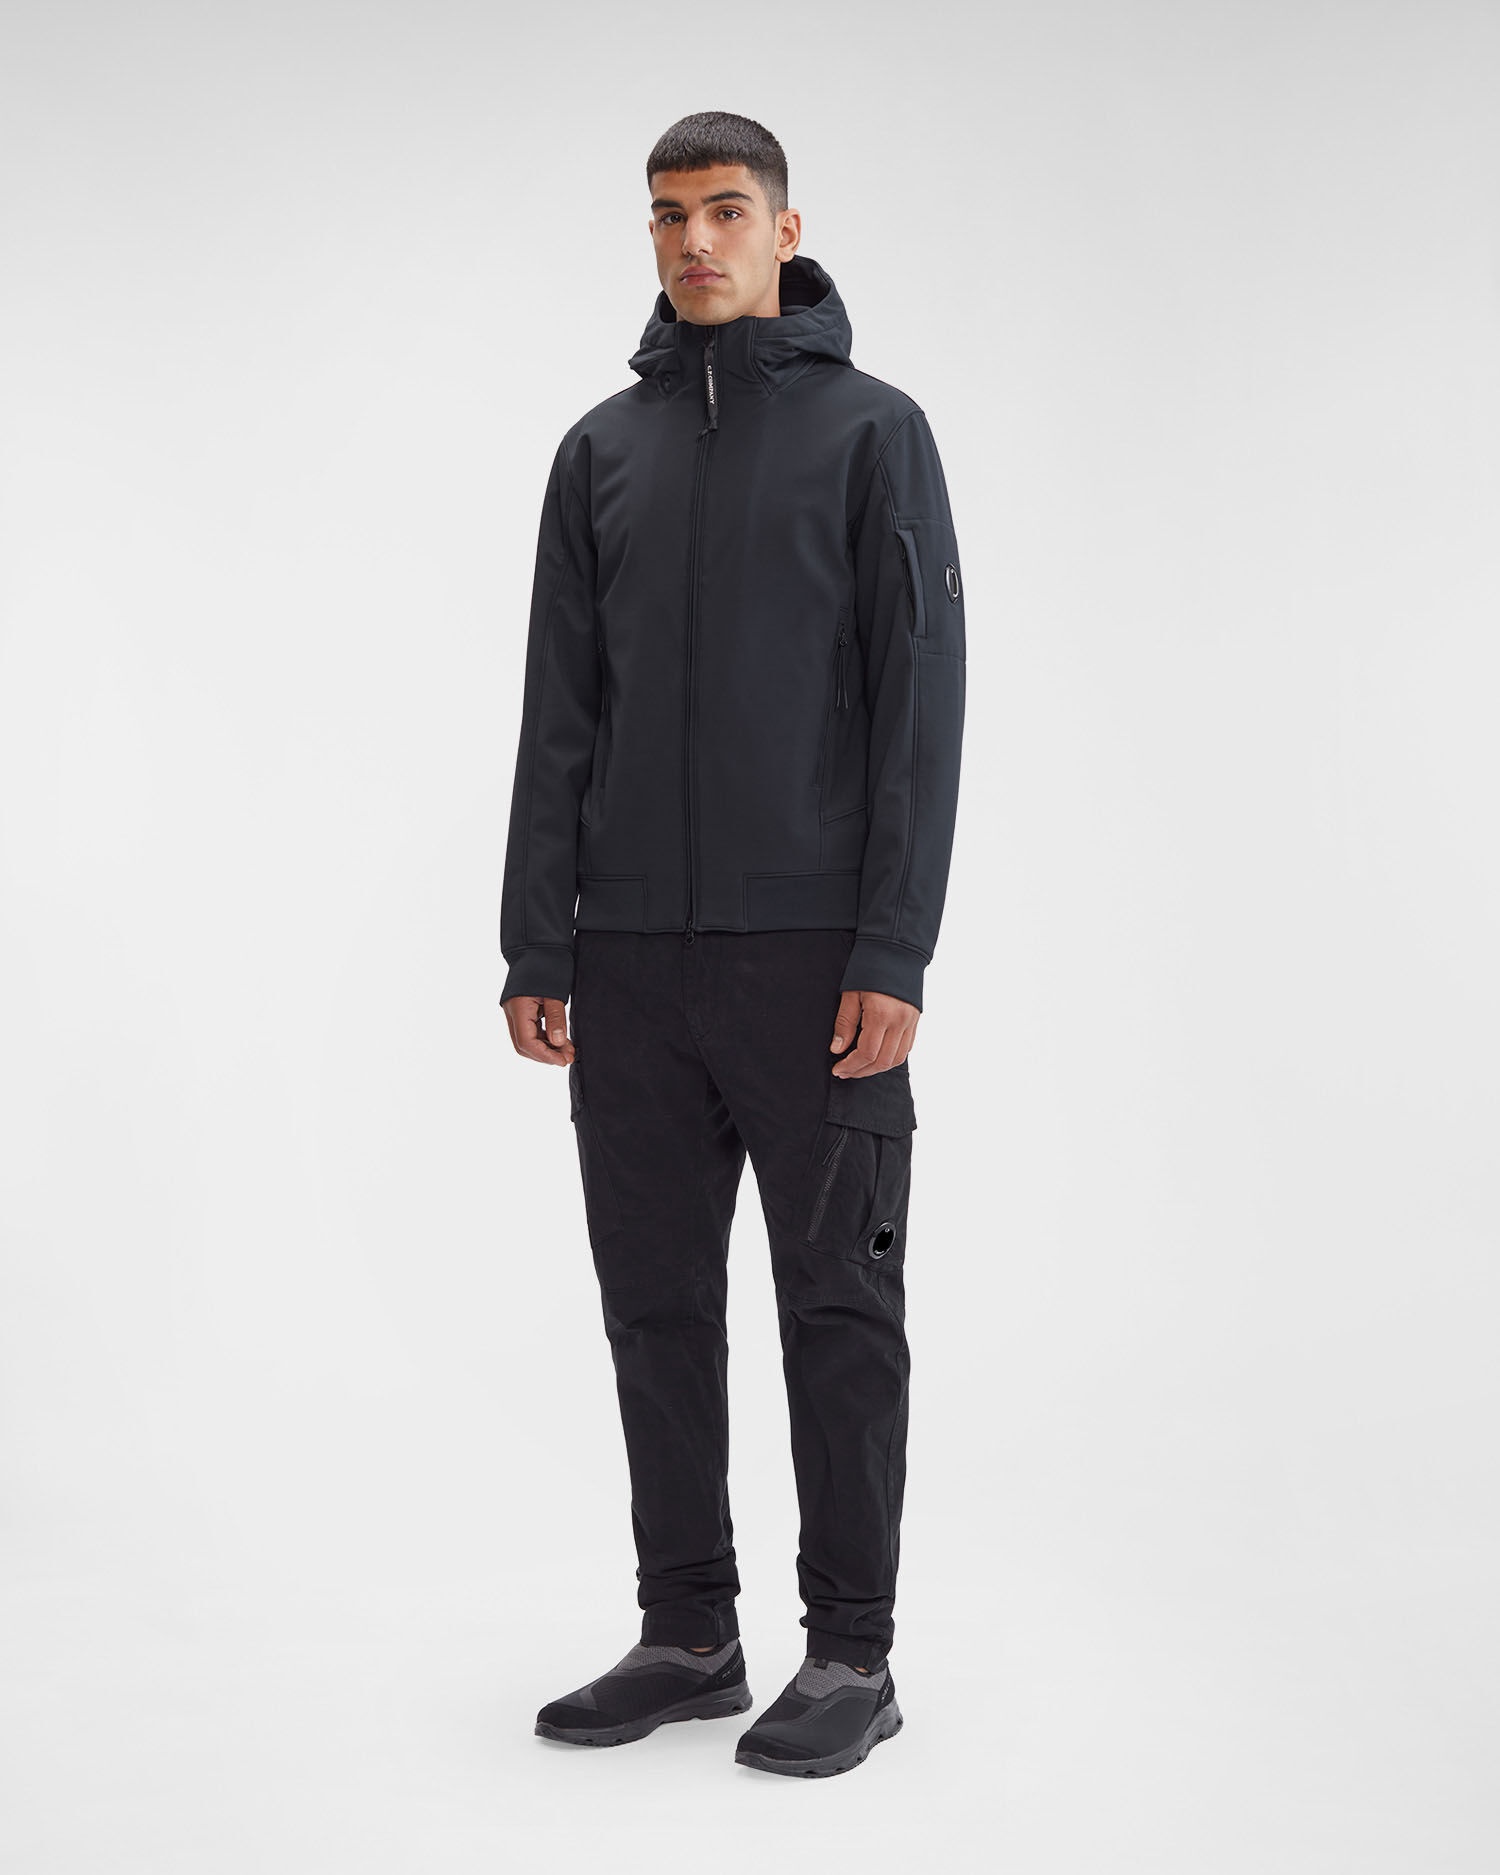 C.P. Shell-R Hooded Jacket - 6